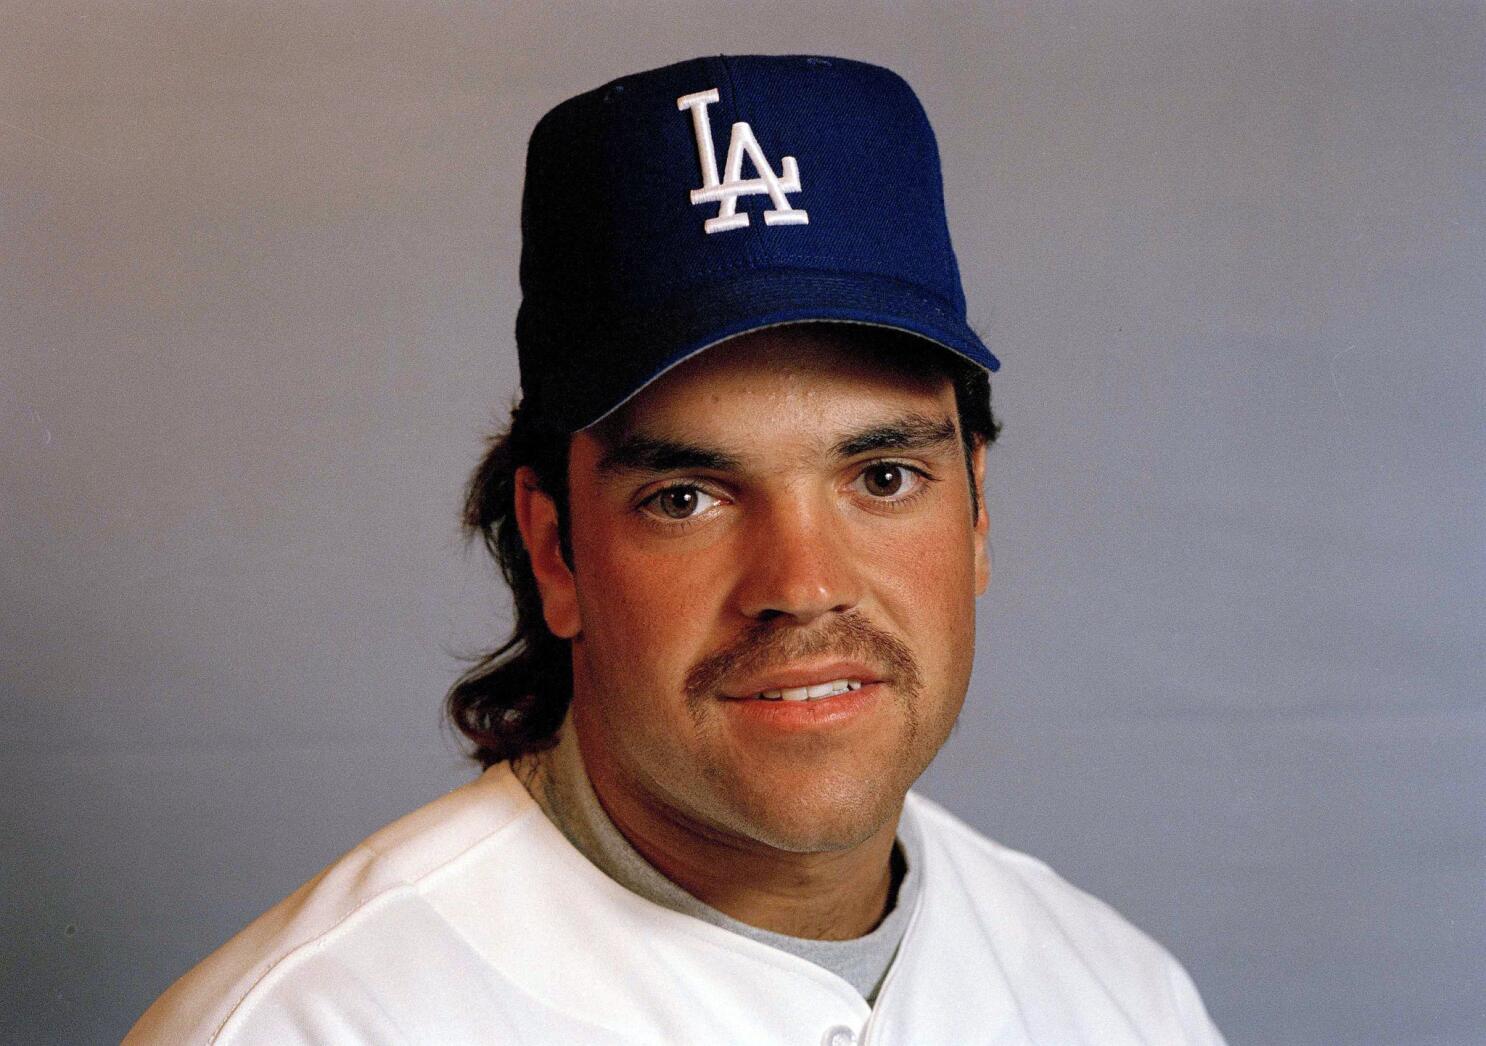 Dodgers Fans Conflicted As Mike Piazza Goes To Cooperstown